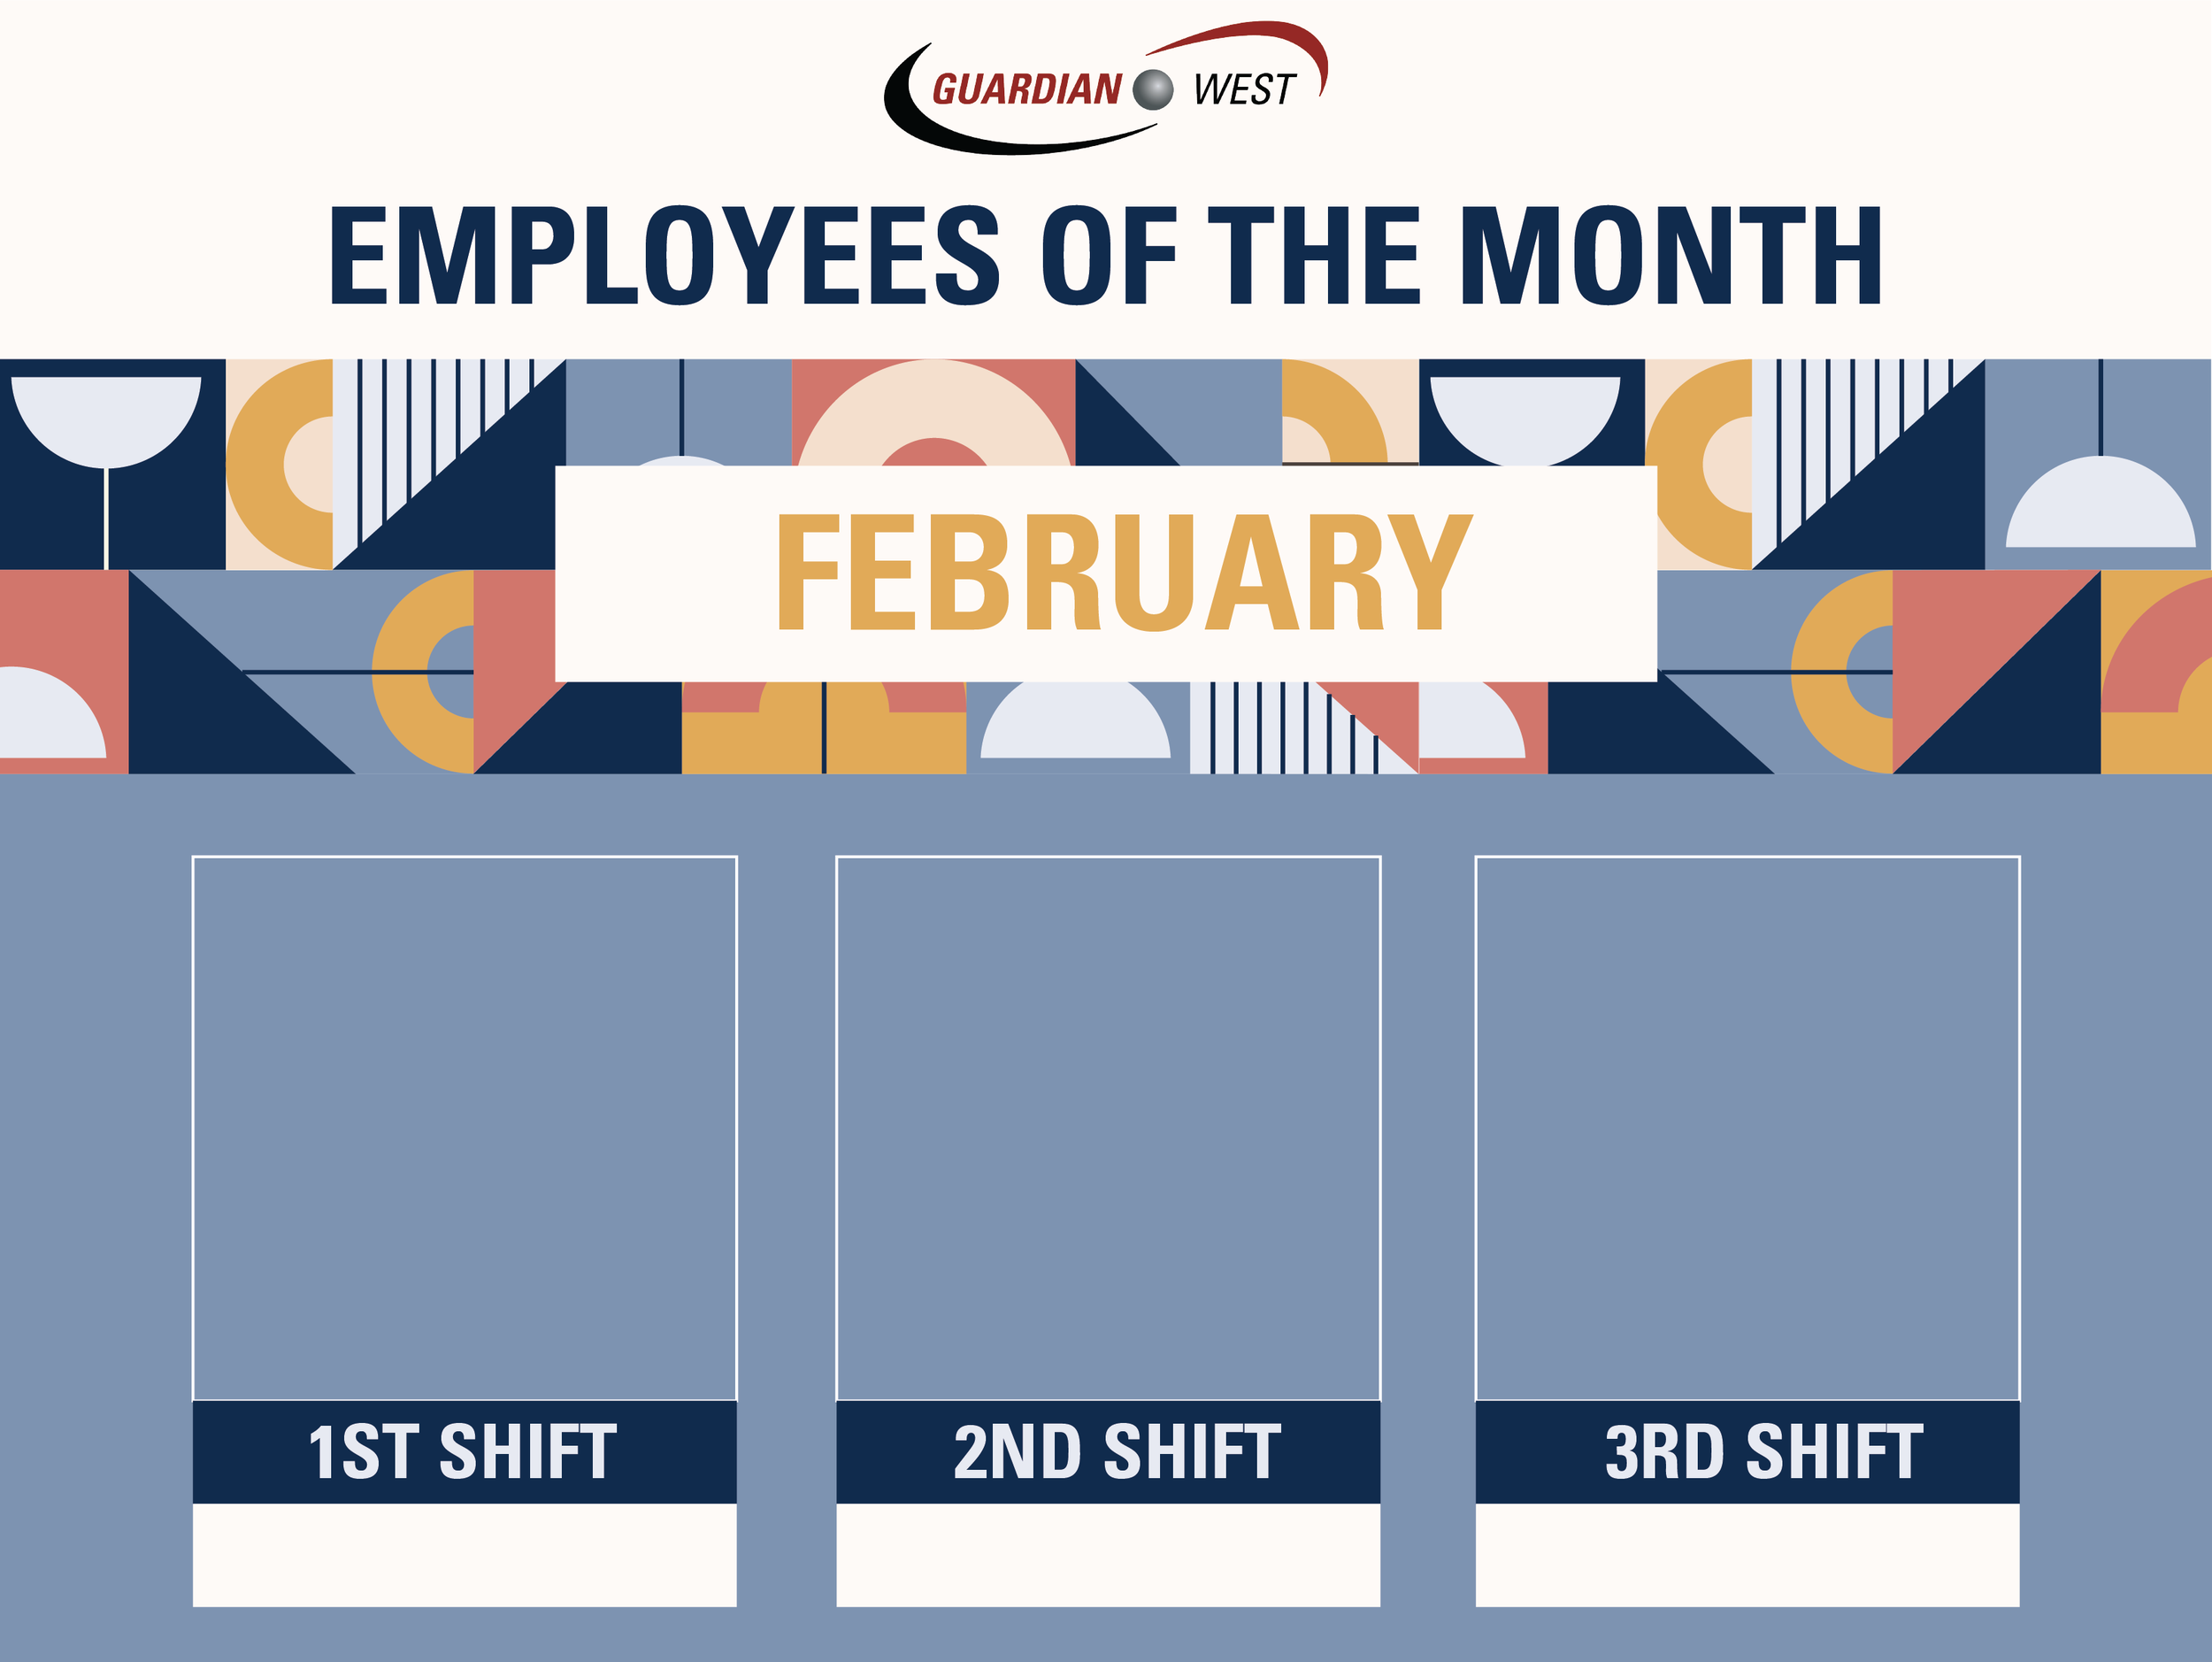 GW_Employee of the month2-03.png